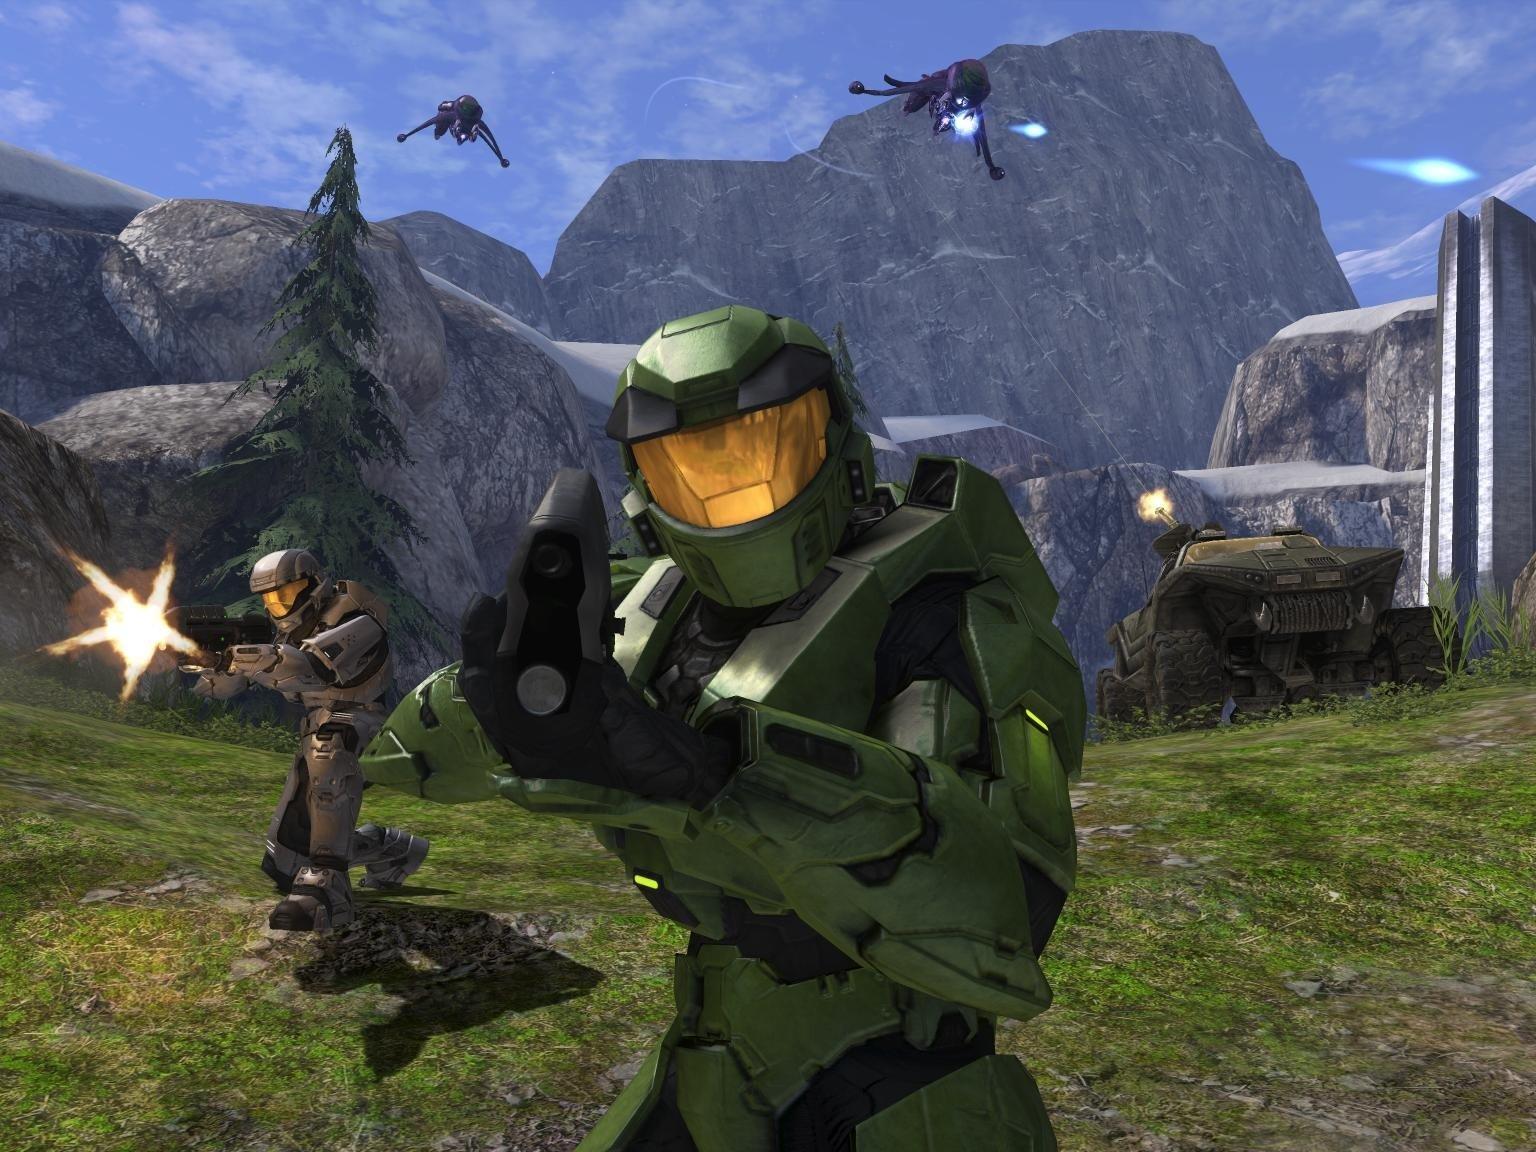 halo combat evolved wallpapers